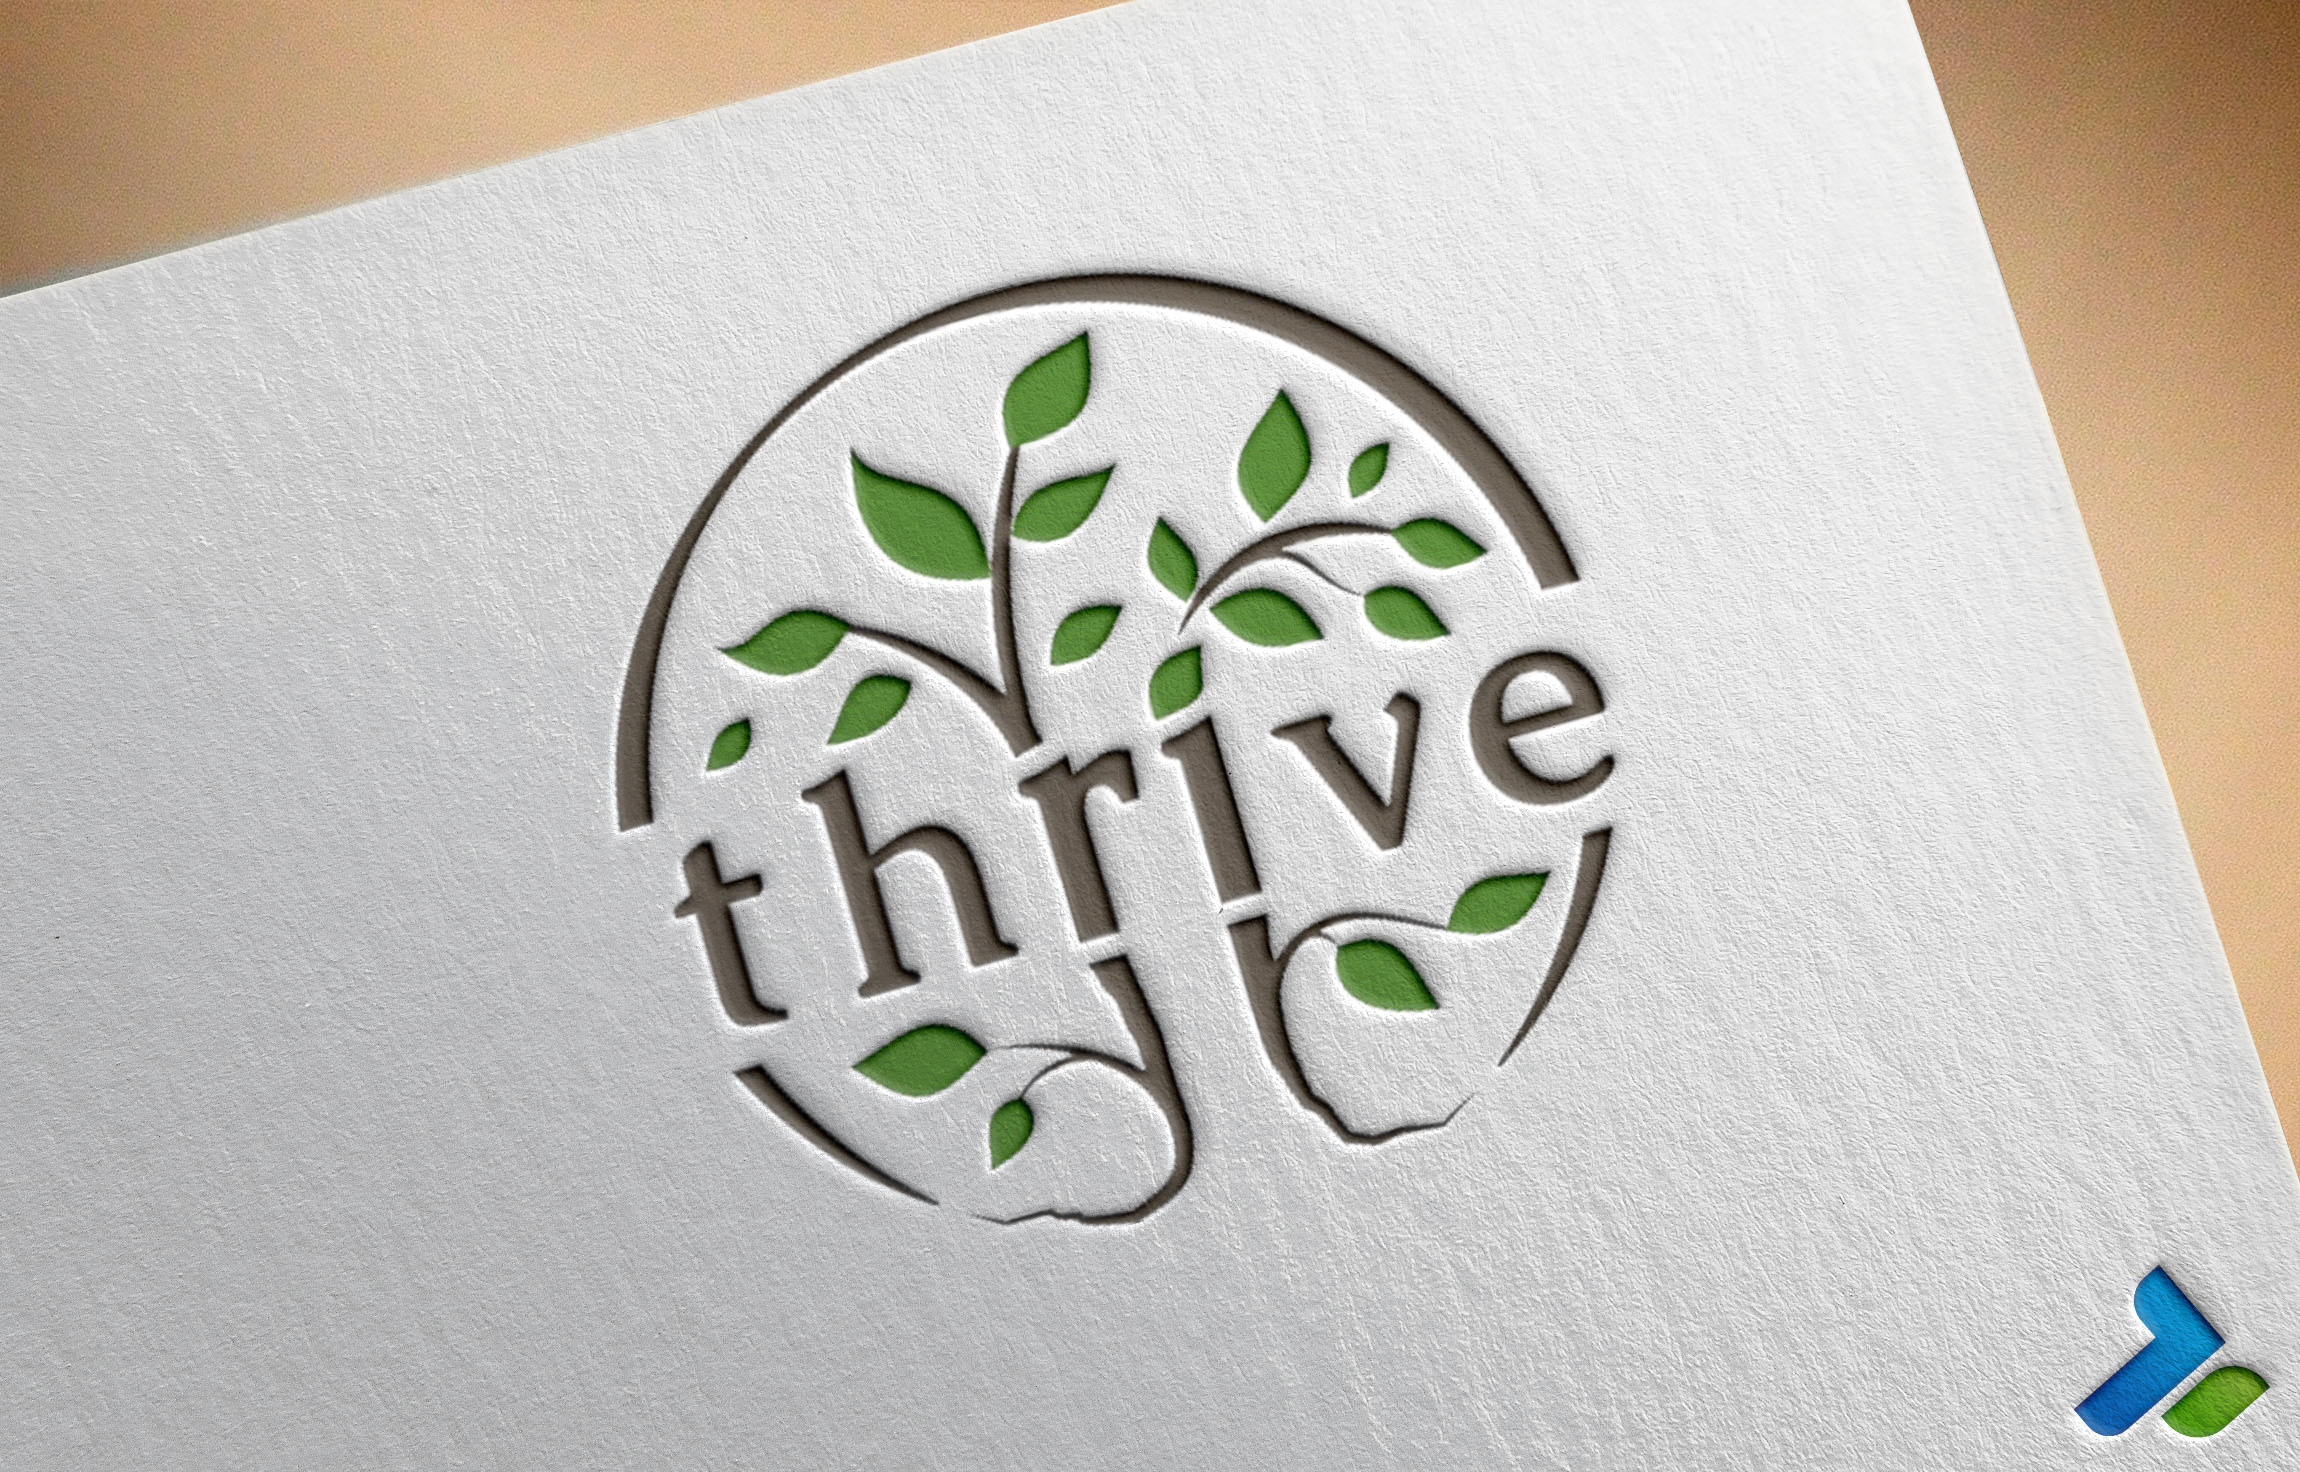 5054I will design a beautiful logo for your company or business